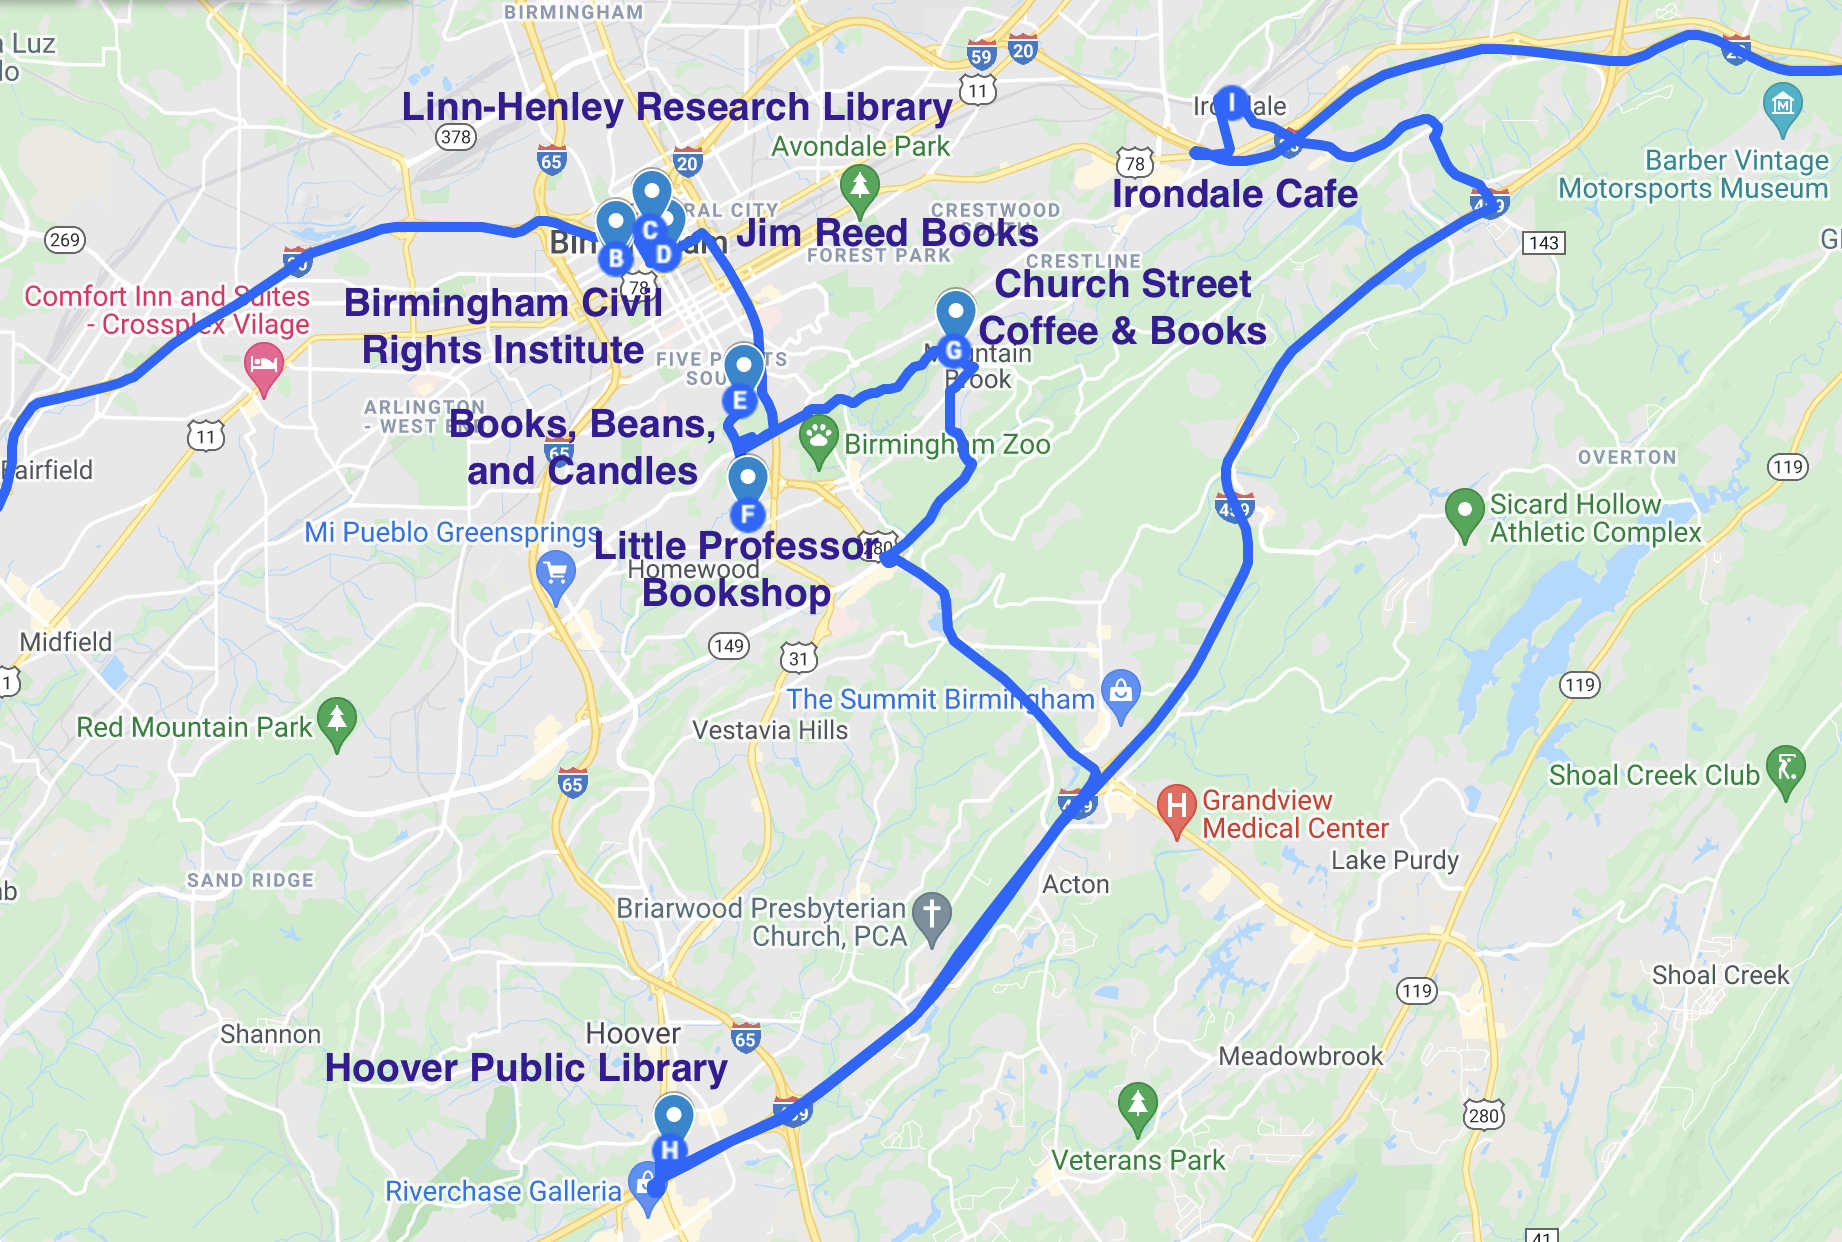 map of literary spots in birmingham, hoover, and irondale alabama 